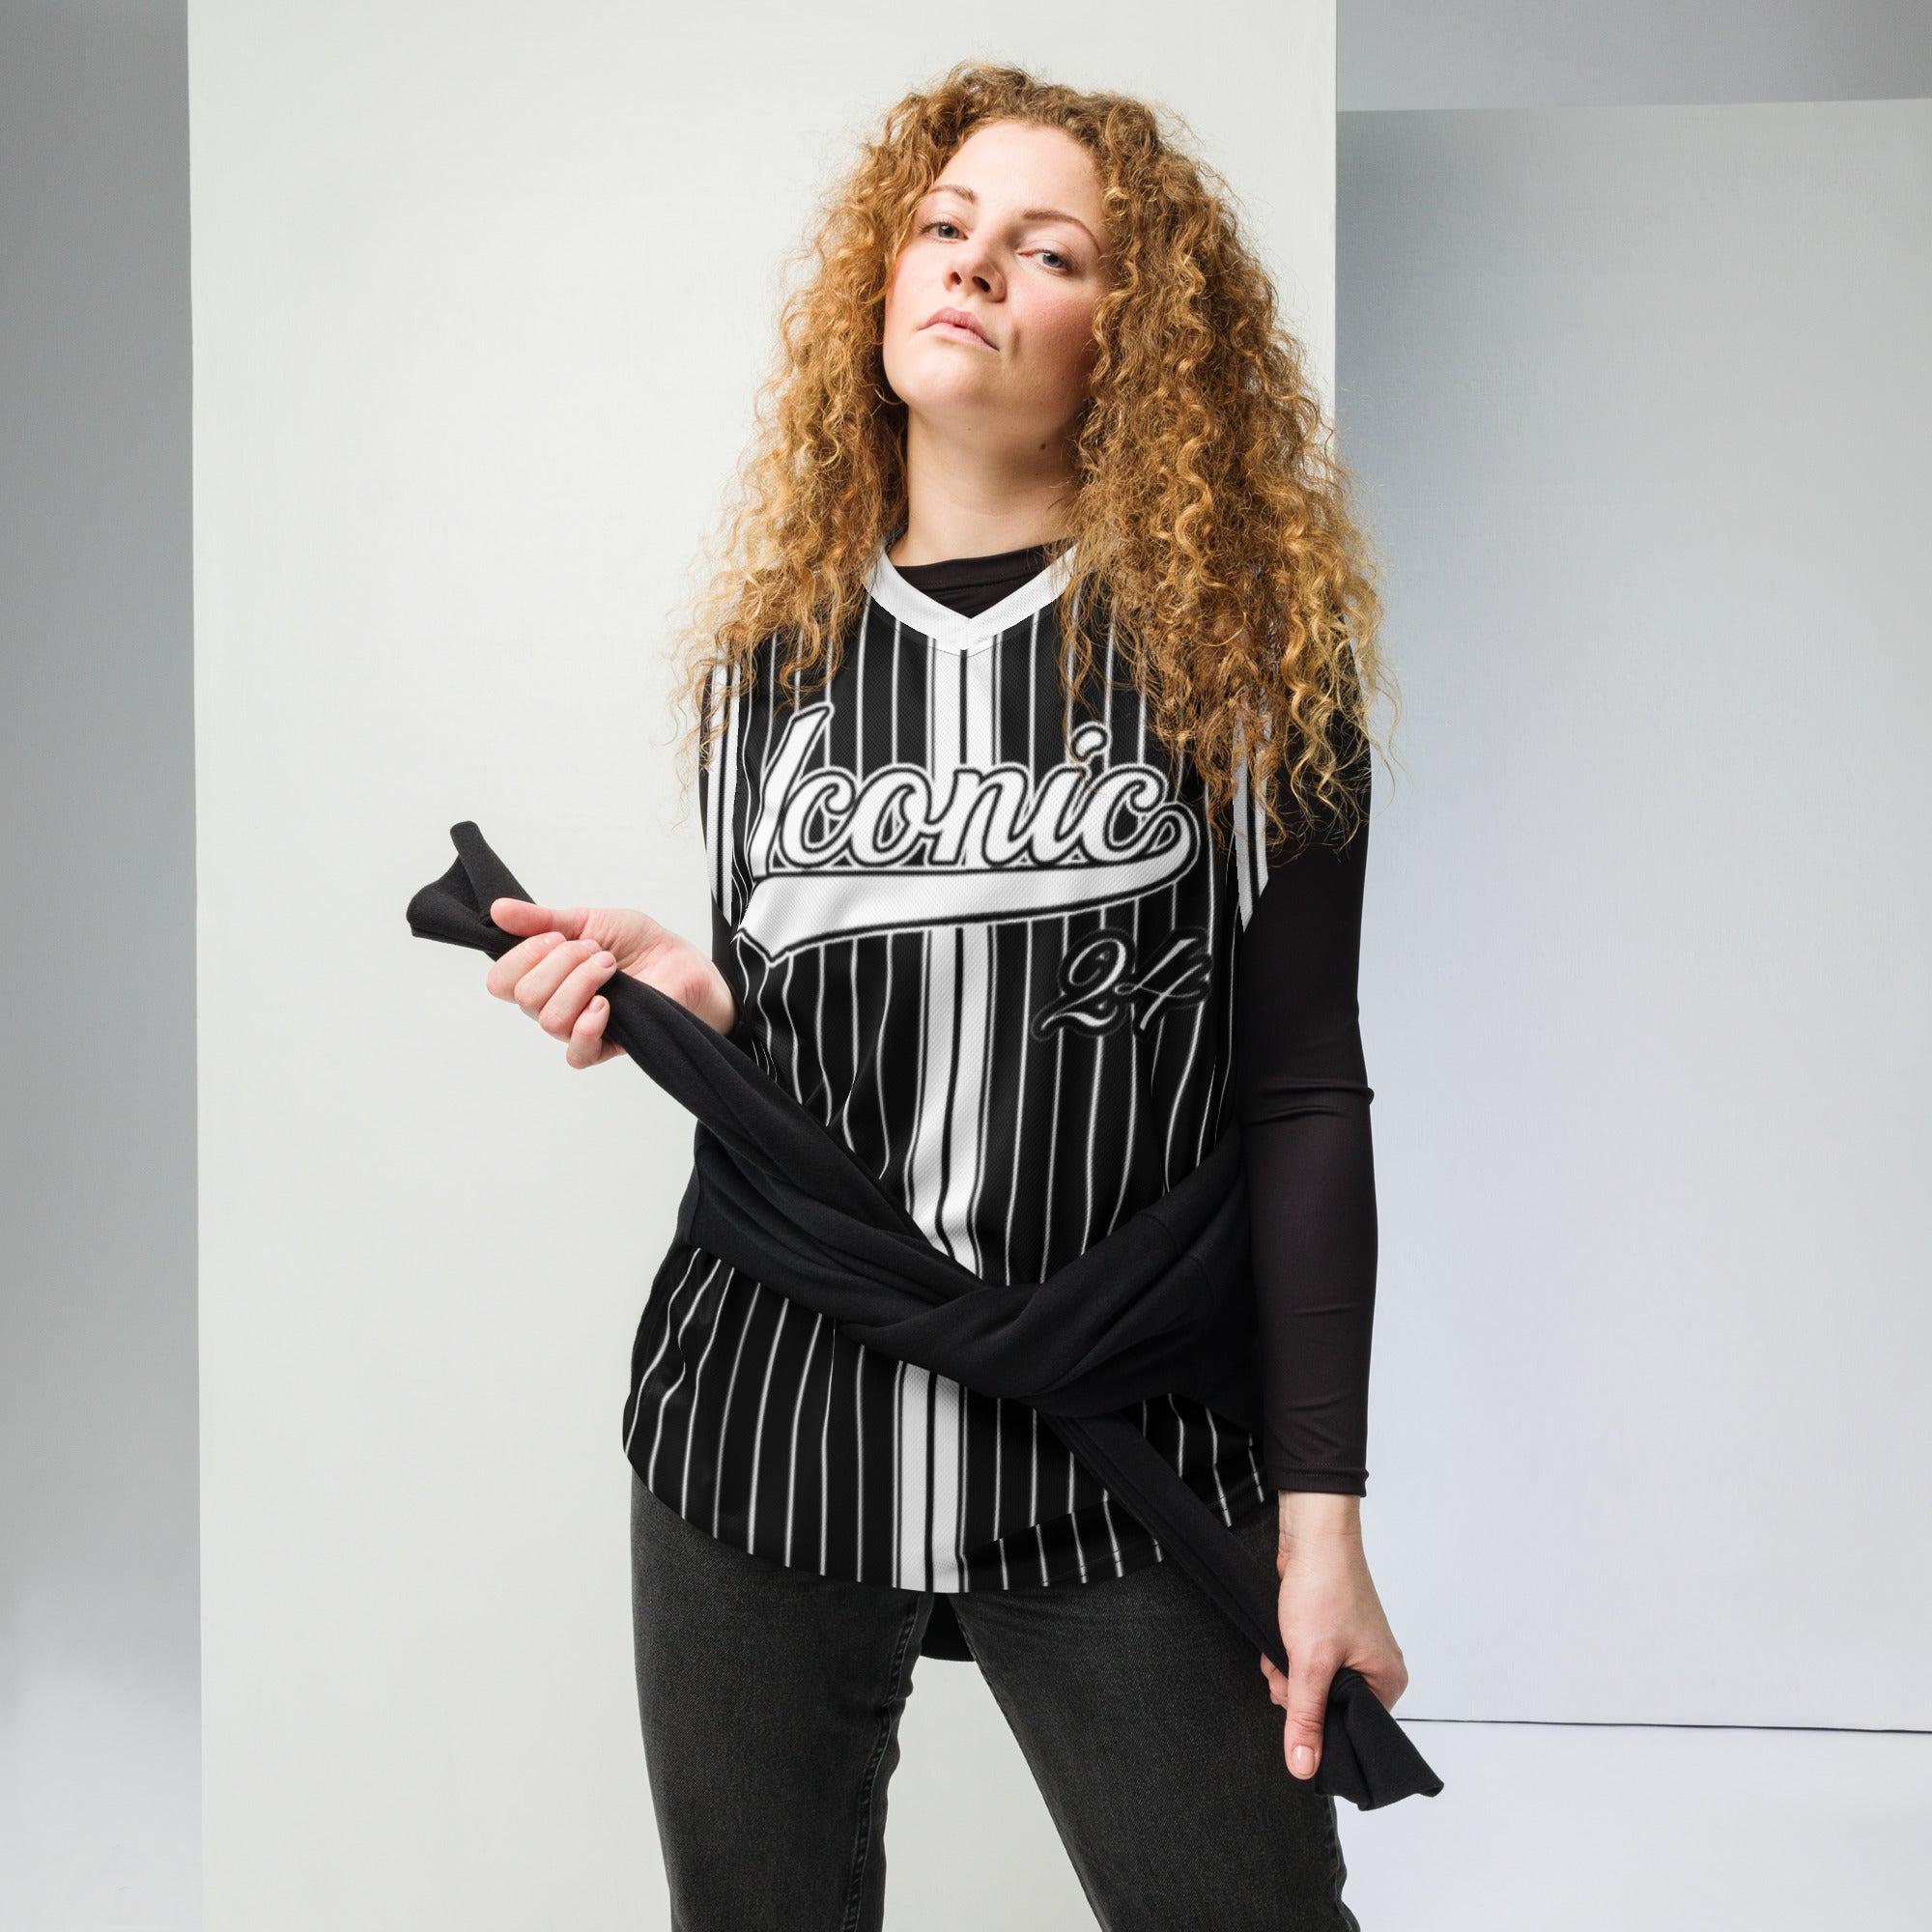 ROYAL Team Iconic. unisex basketball jersey Pinstripe Blk and White